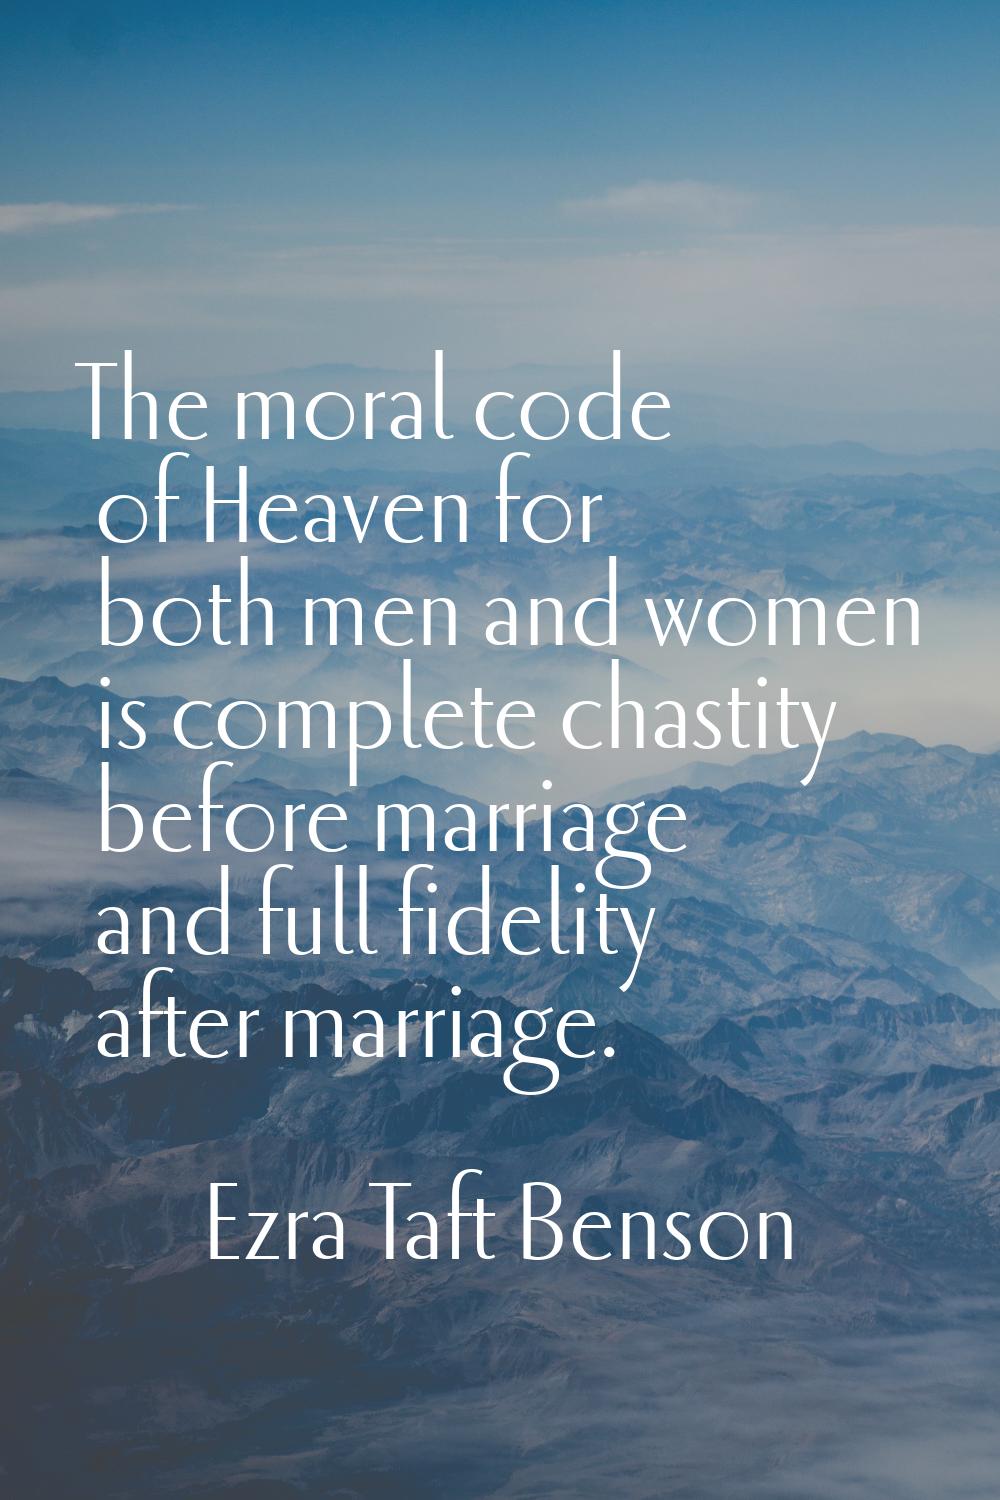 The moral code of Heaven for both men and women is complete chastity before marriage and full fidel